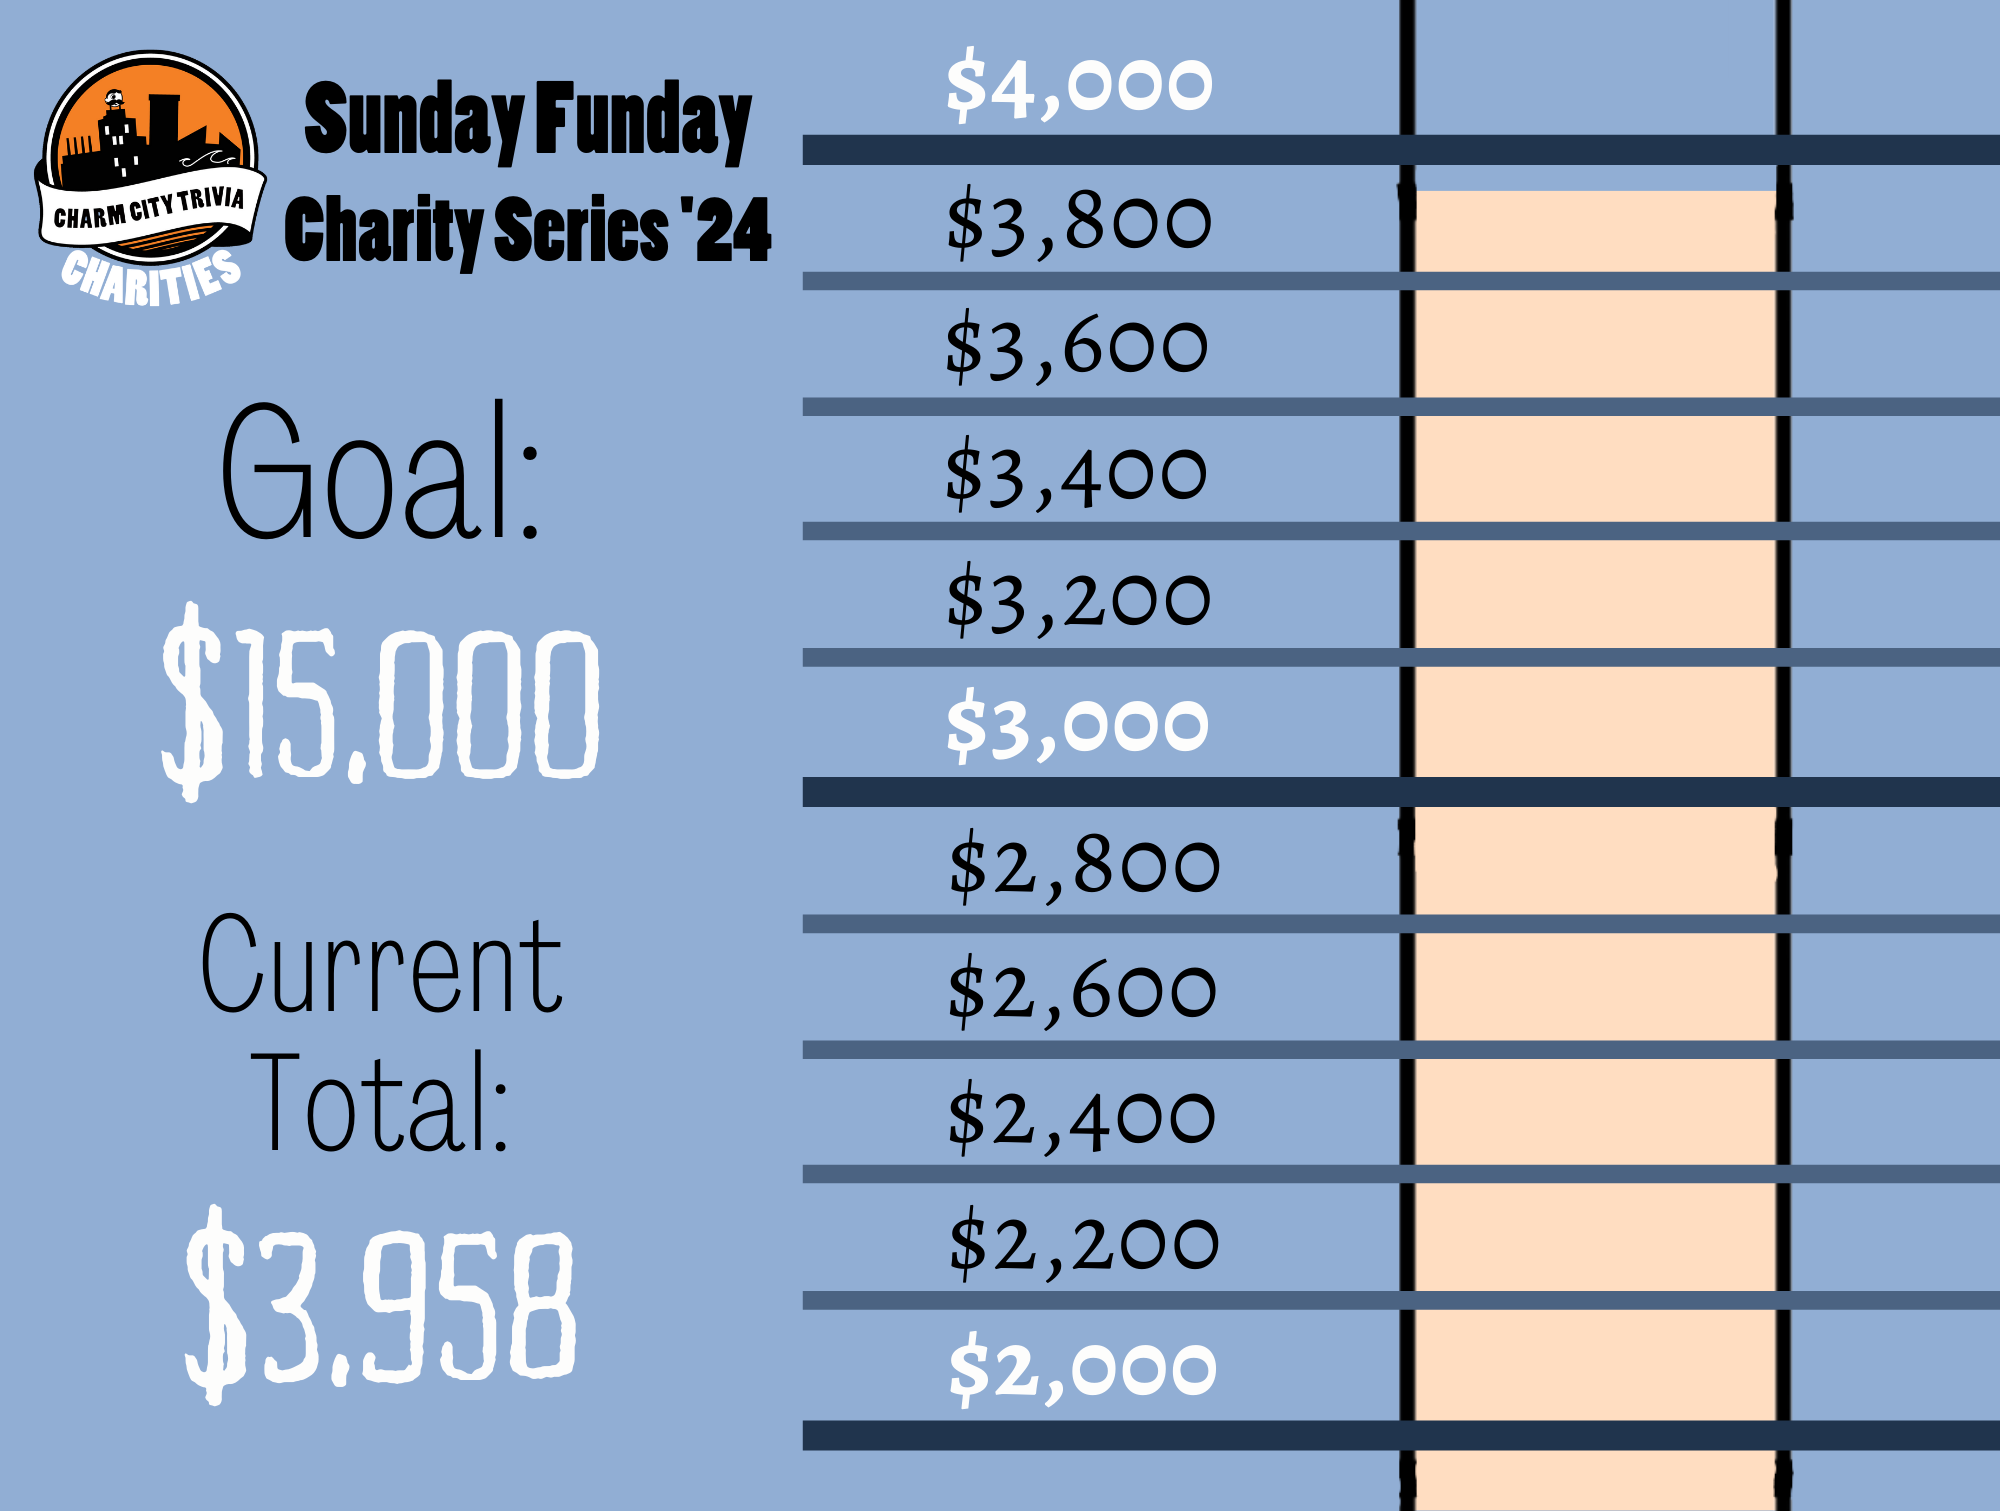 a light blue background with a section of the thermometer, blue lines separating the thermometer into donation milestones by 200s from $2,000 to $4,000, the Charm City Trivia Charities logo, a very light orange bar inside the thermometer that goes from the bottom of the image to just below the line that reads $4,000, and black and white text. The text reads: Sunday Funday Charity Series '24. Goal: $15,000. Current Total: $3,958